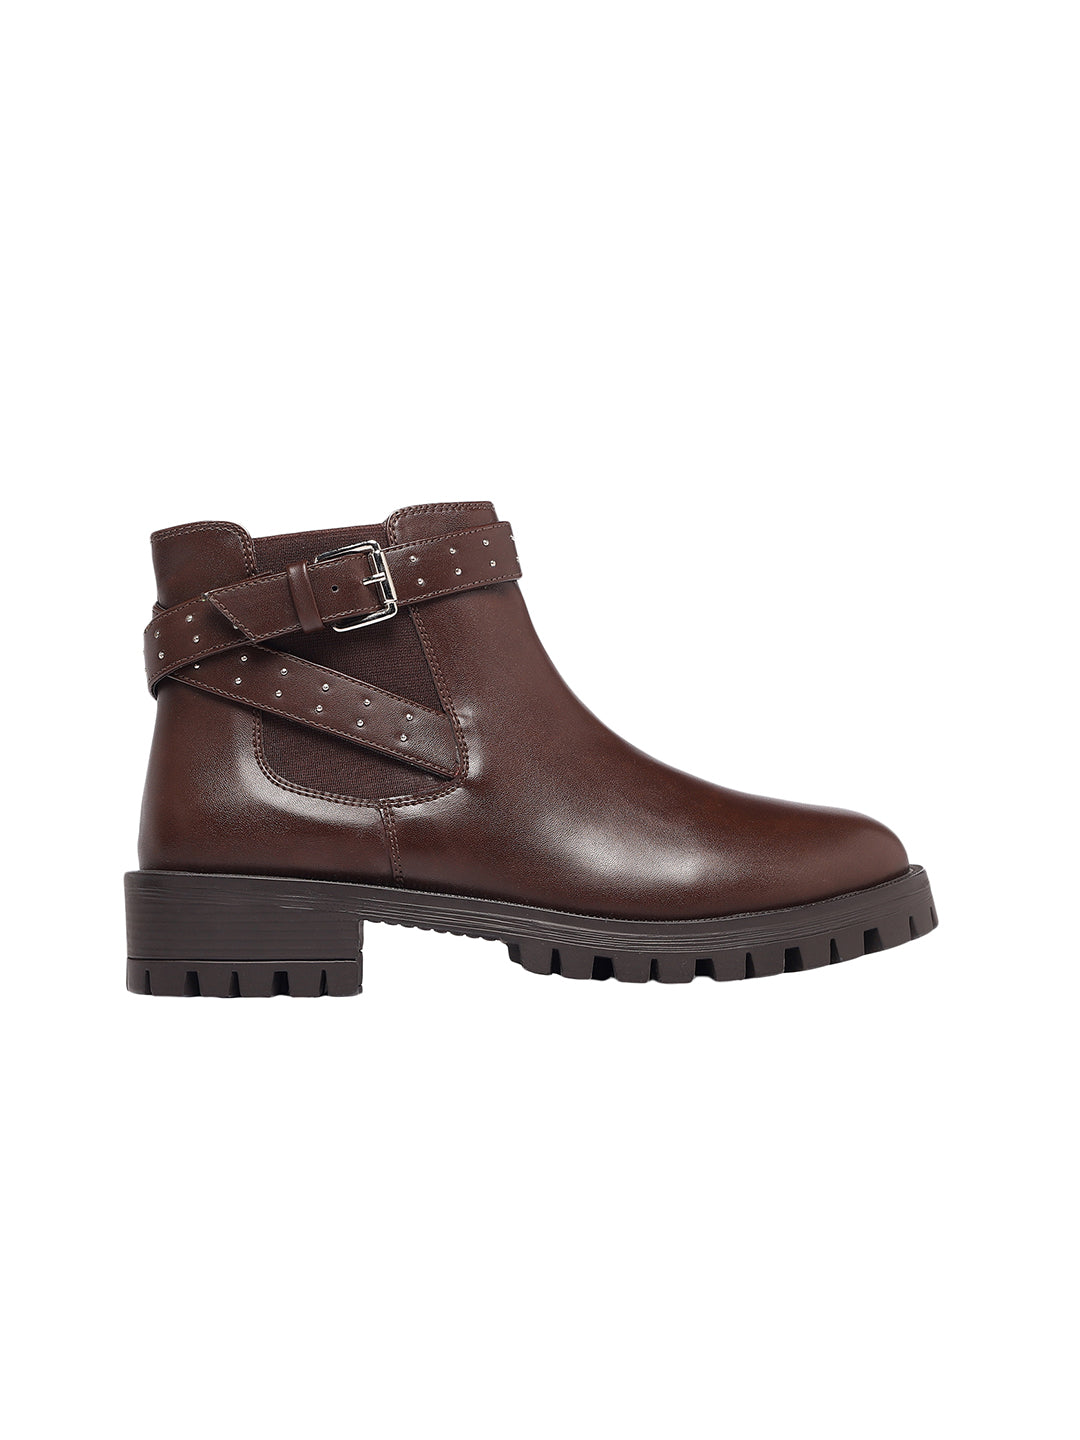 Cocoa Brown Boots